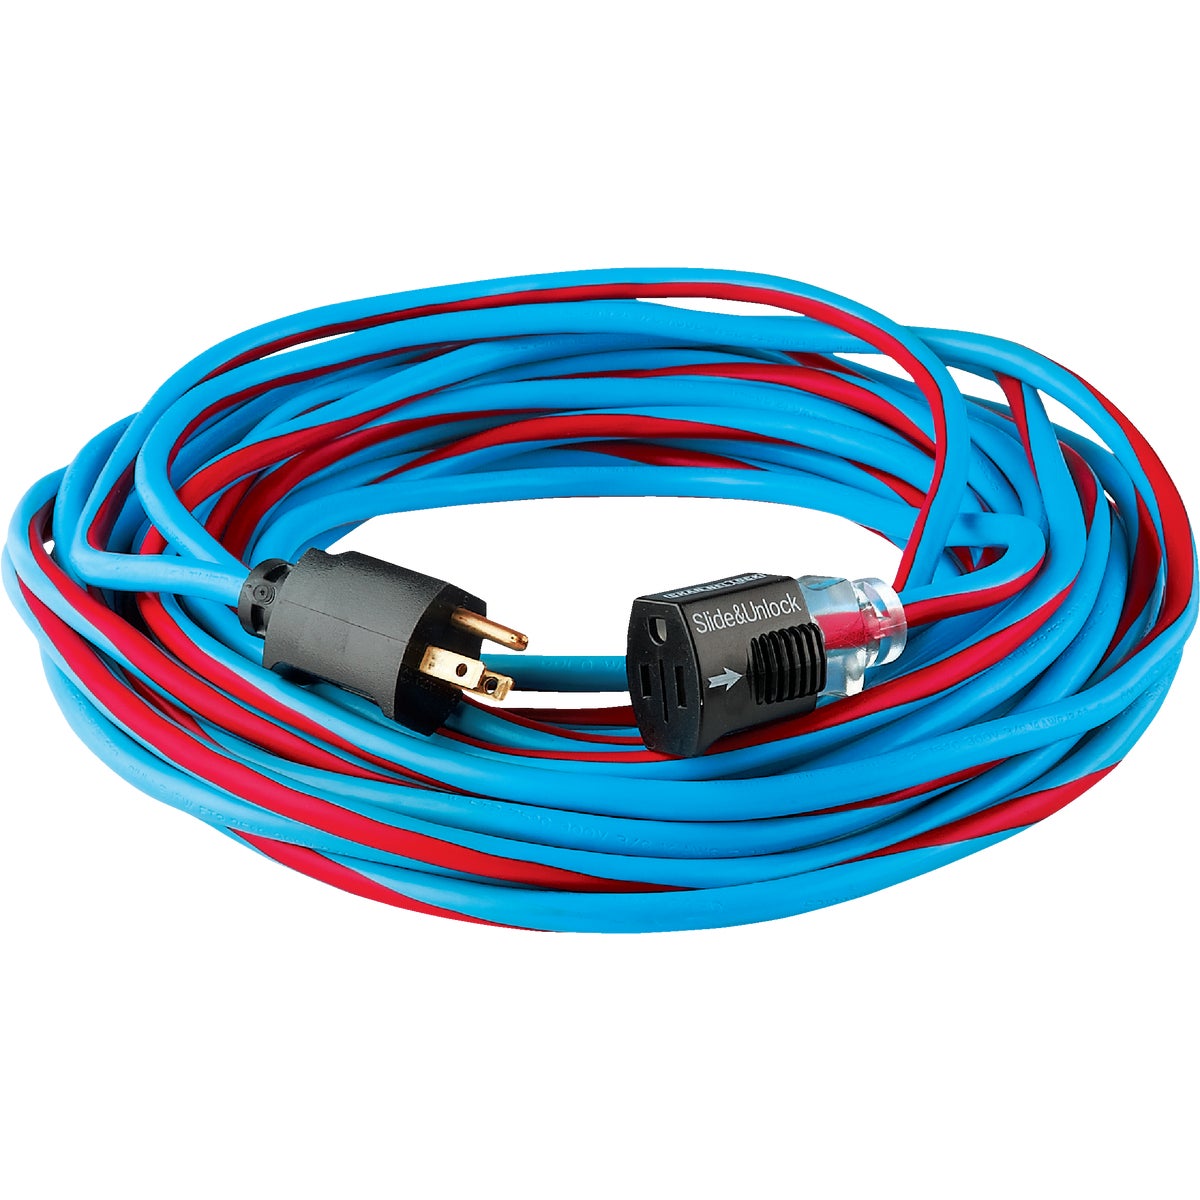 Channellock 25 Ft. 12/3 Extension Cord